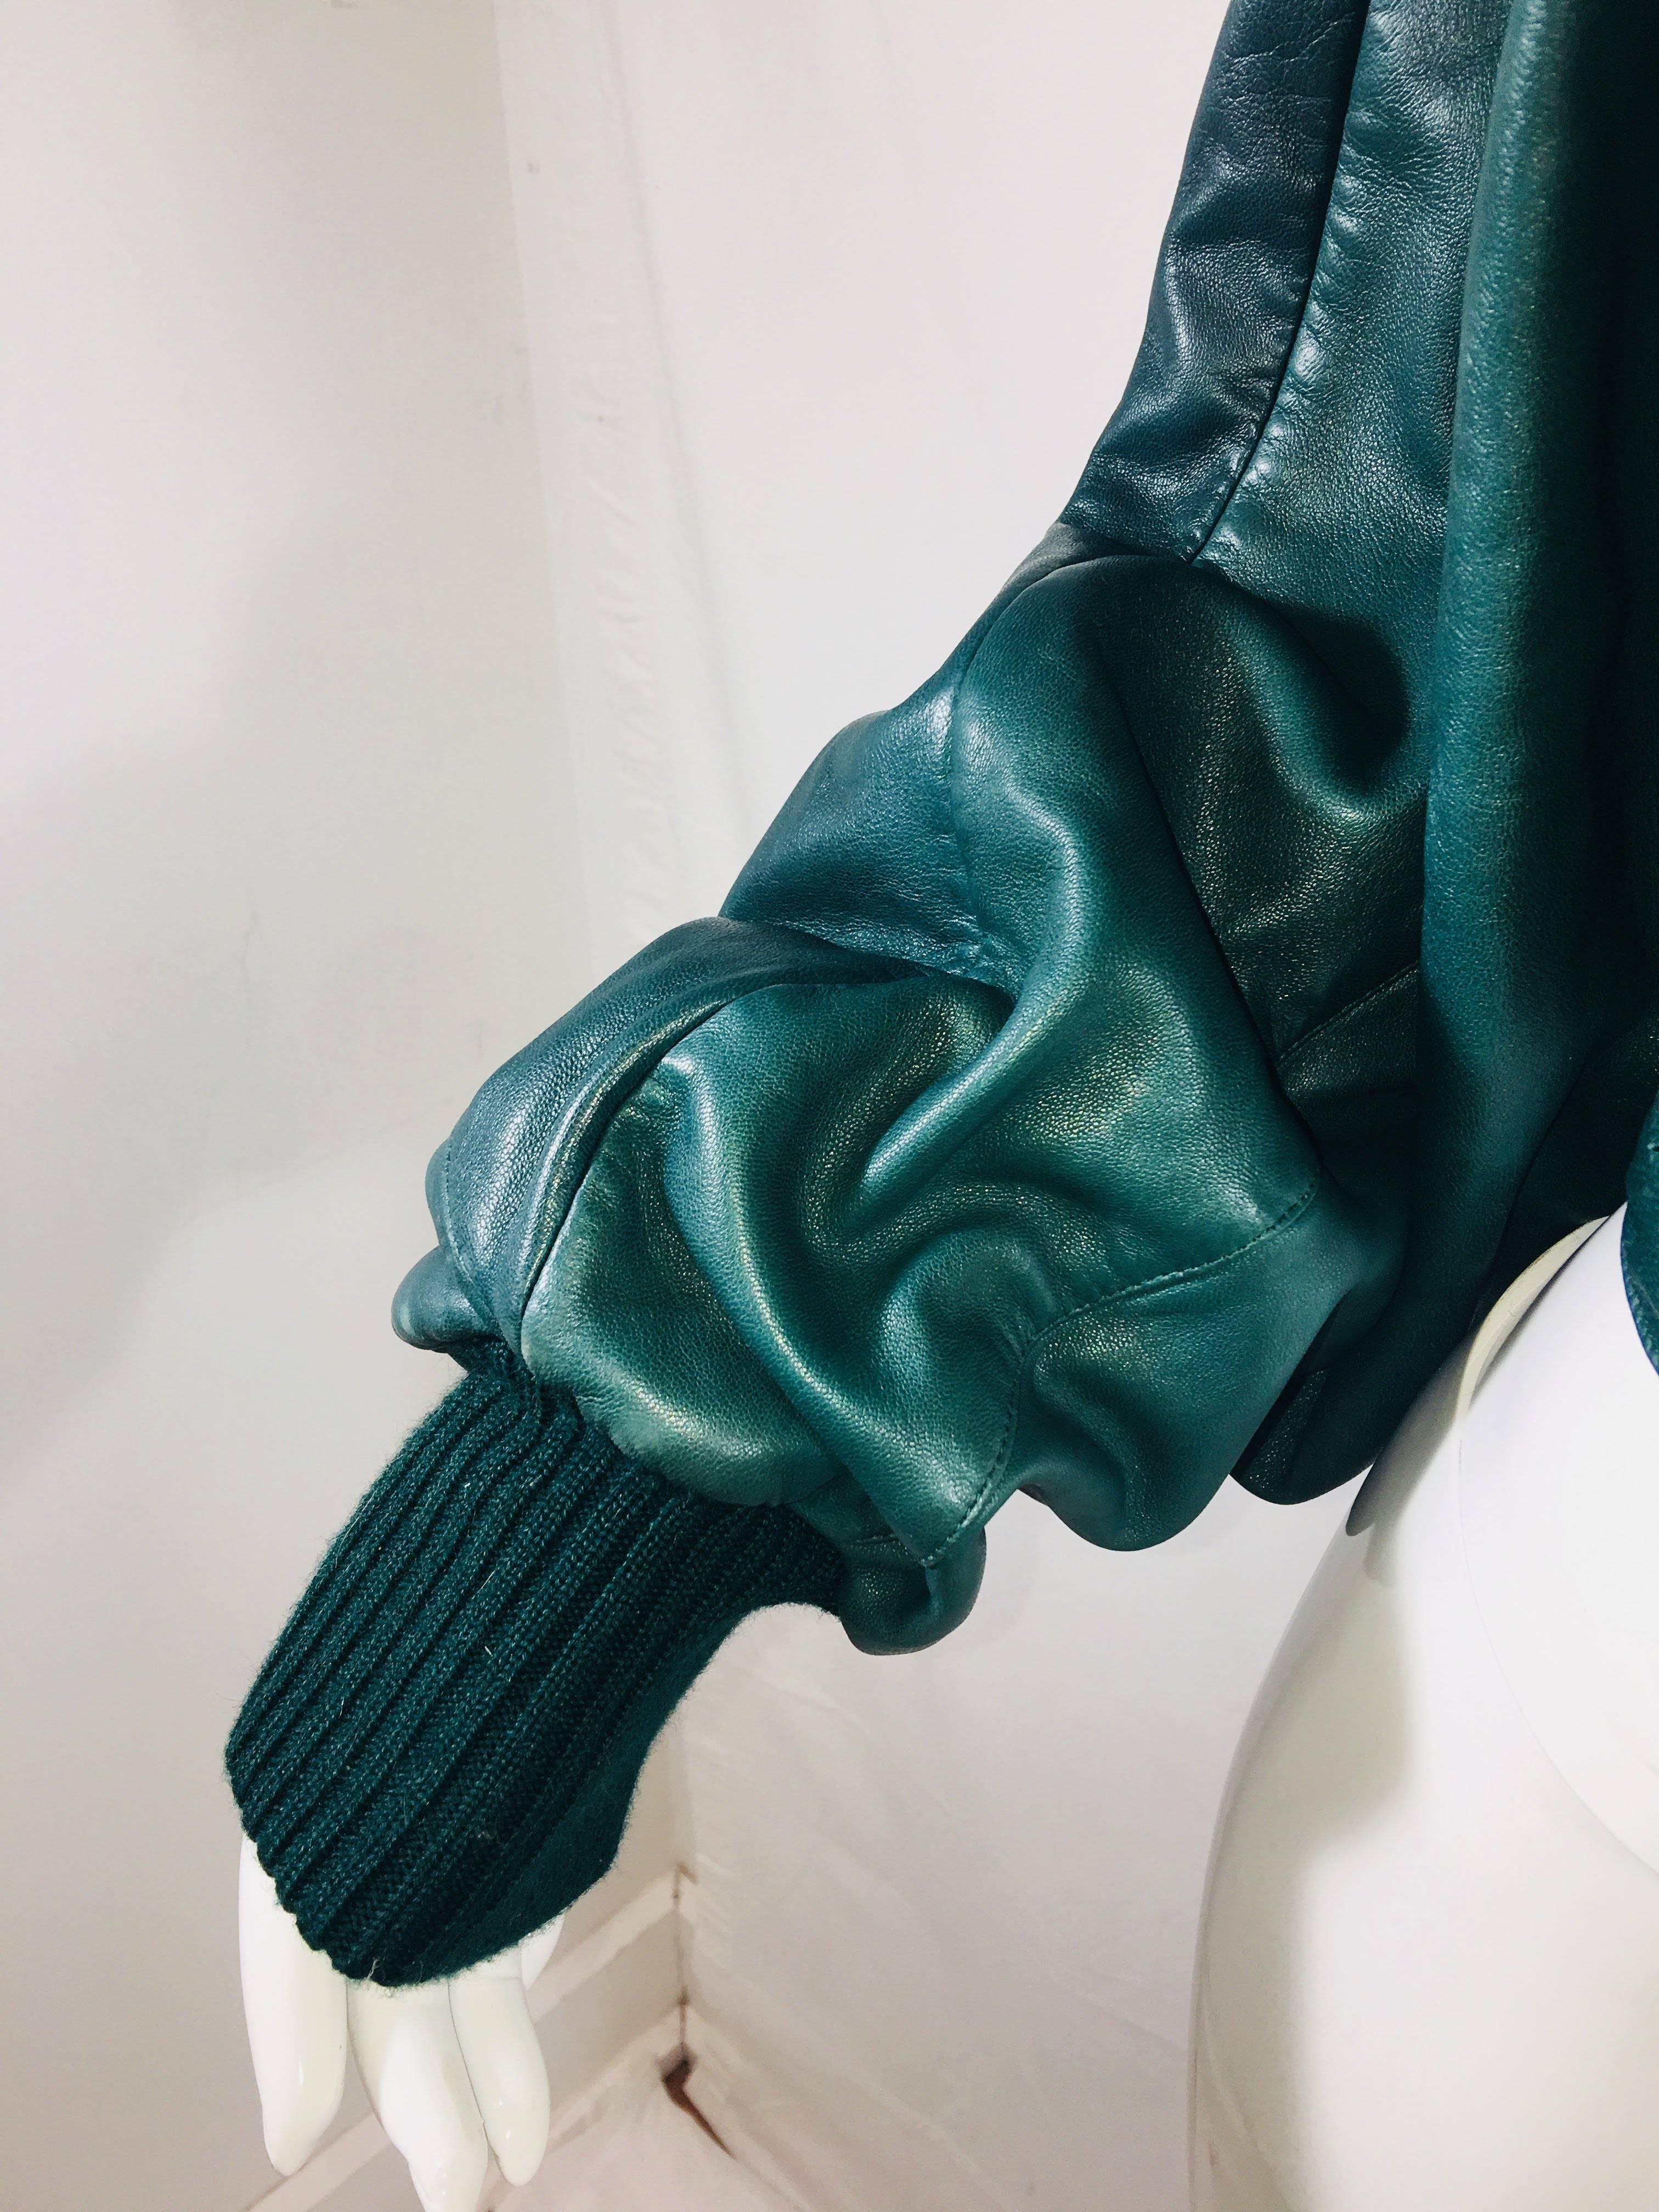 Claude Montana Forest Green Bomber Jacket in Lamb Leather. Cropped with Ribbed Collar and Cuffs.